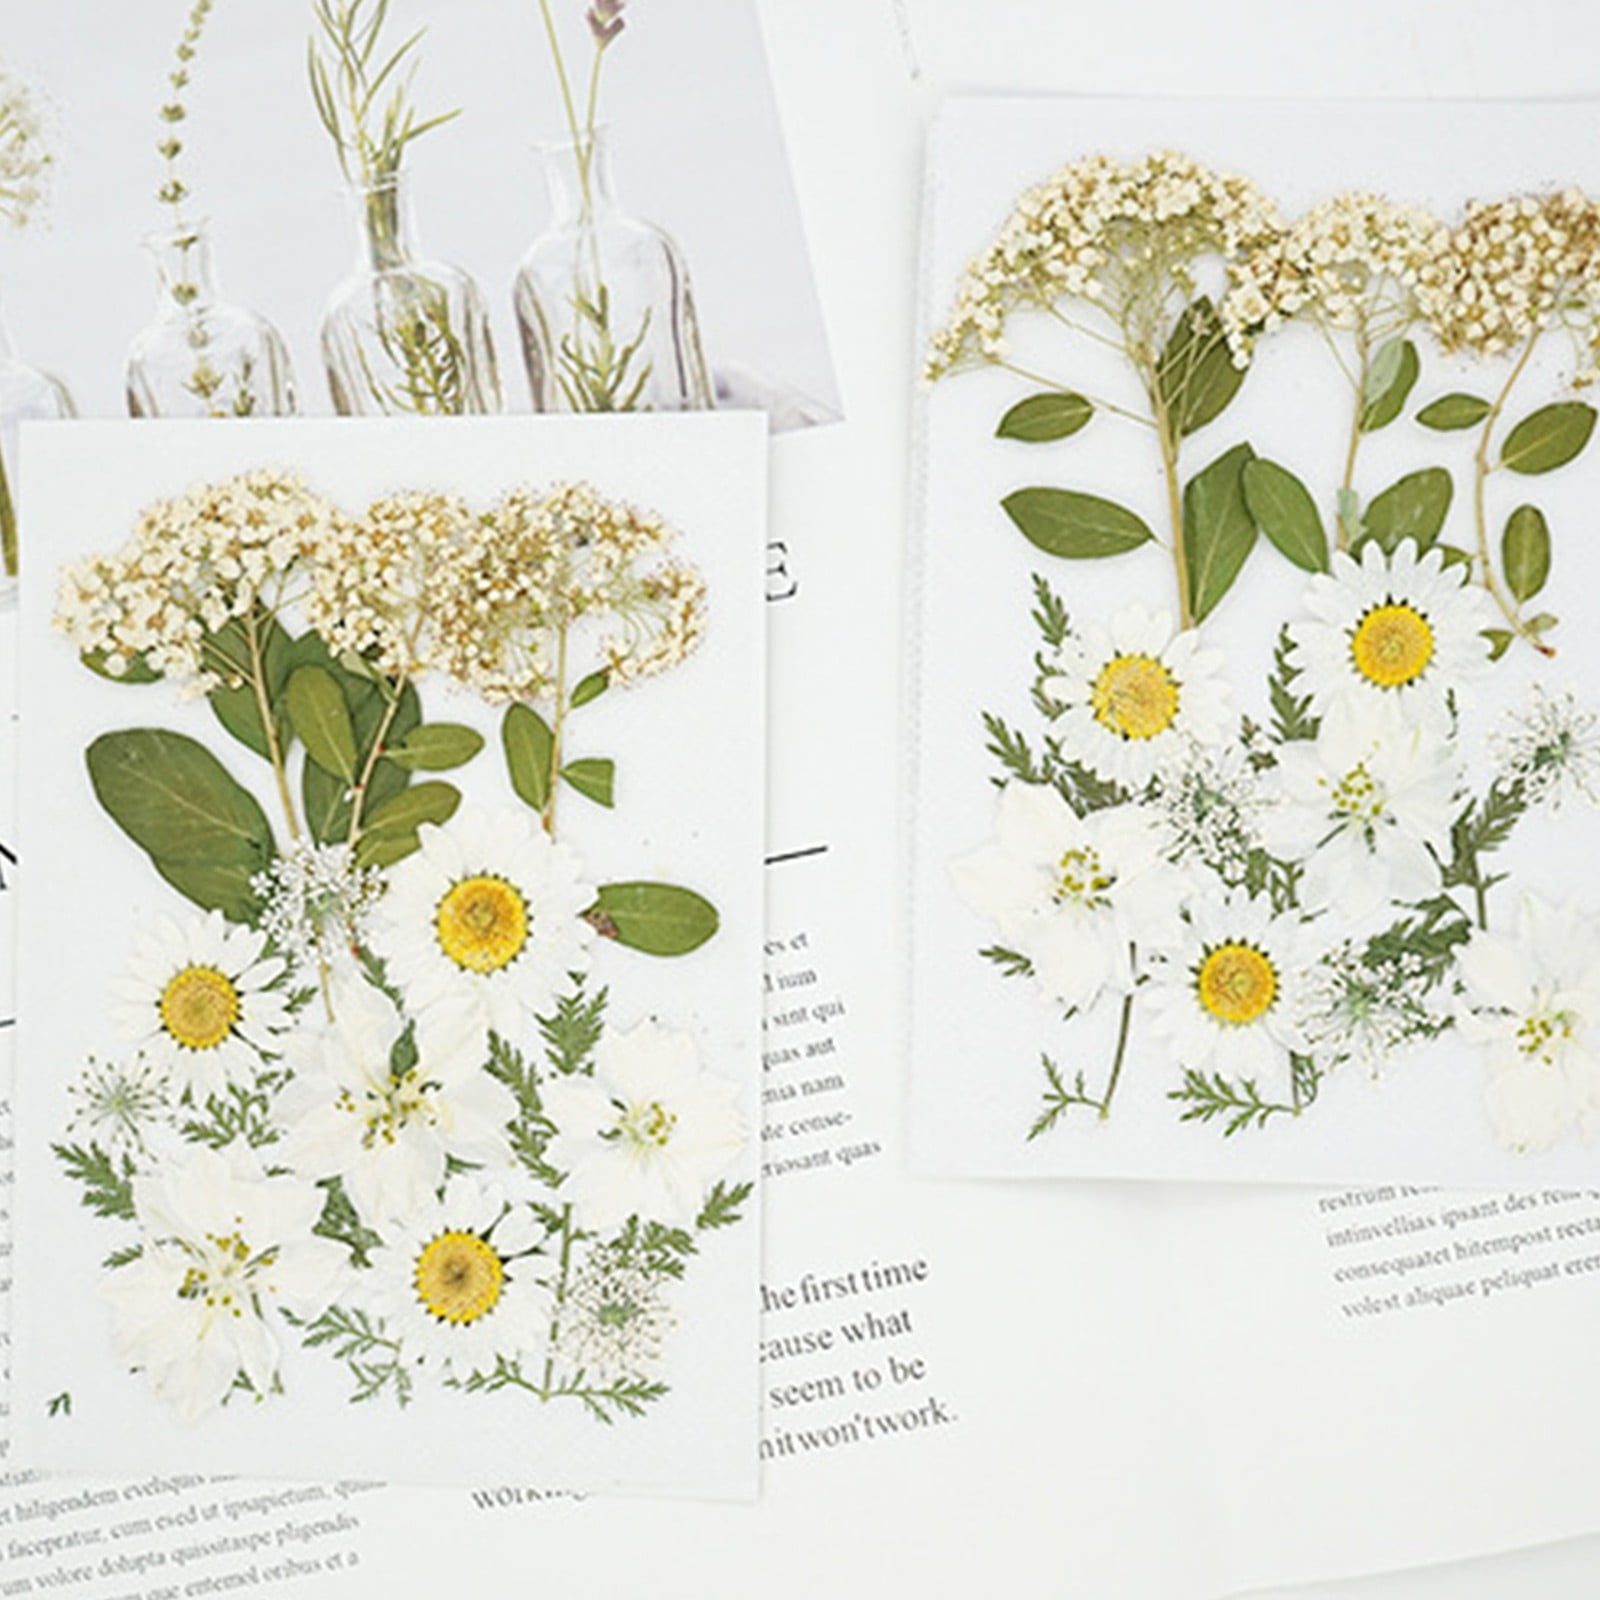 How to dry flowers - Gardens Illustrated